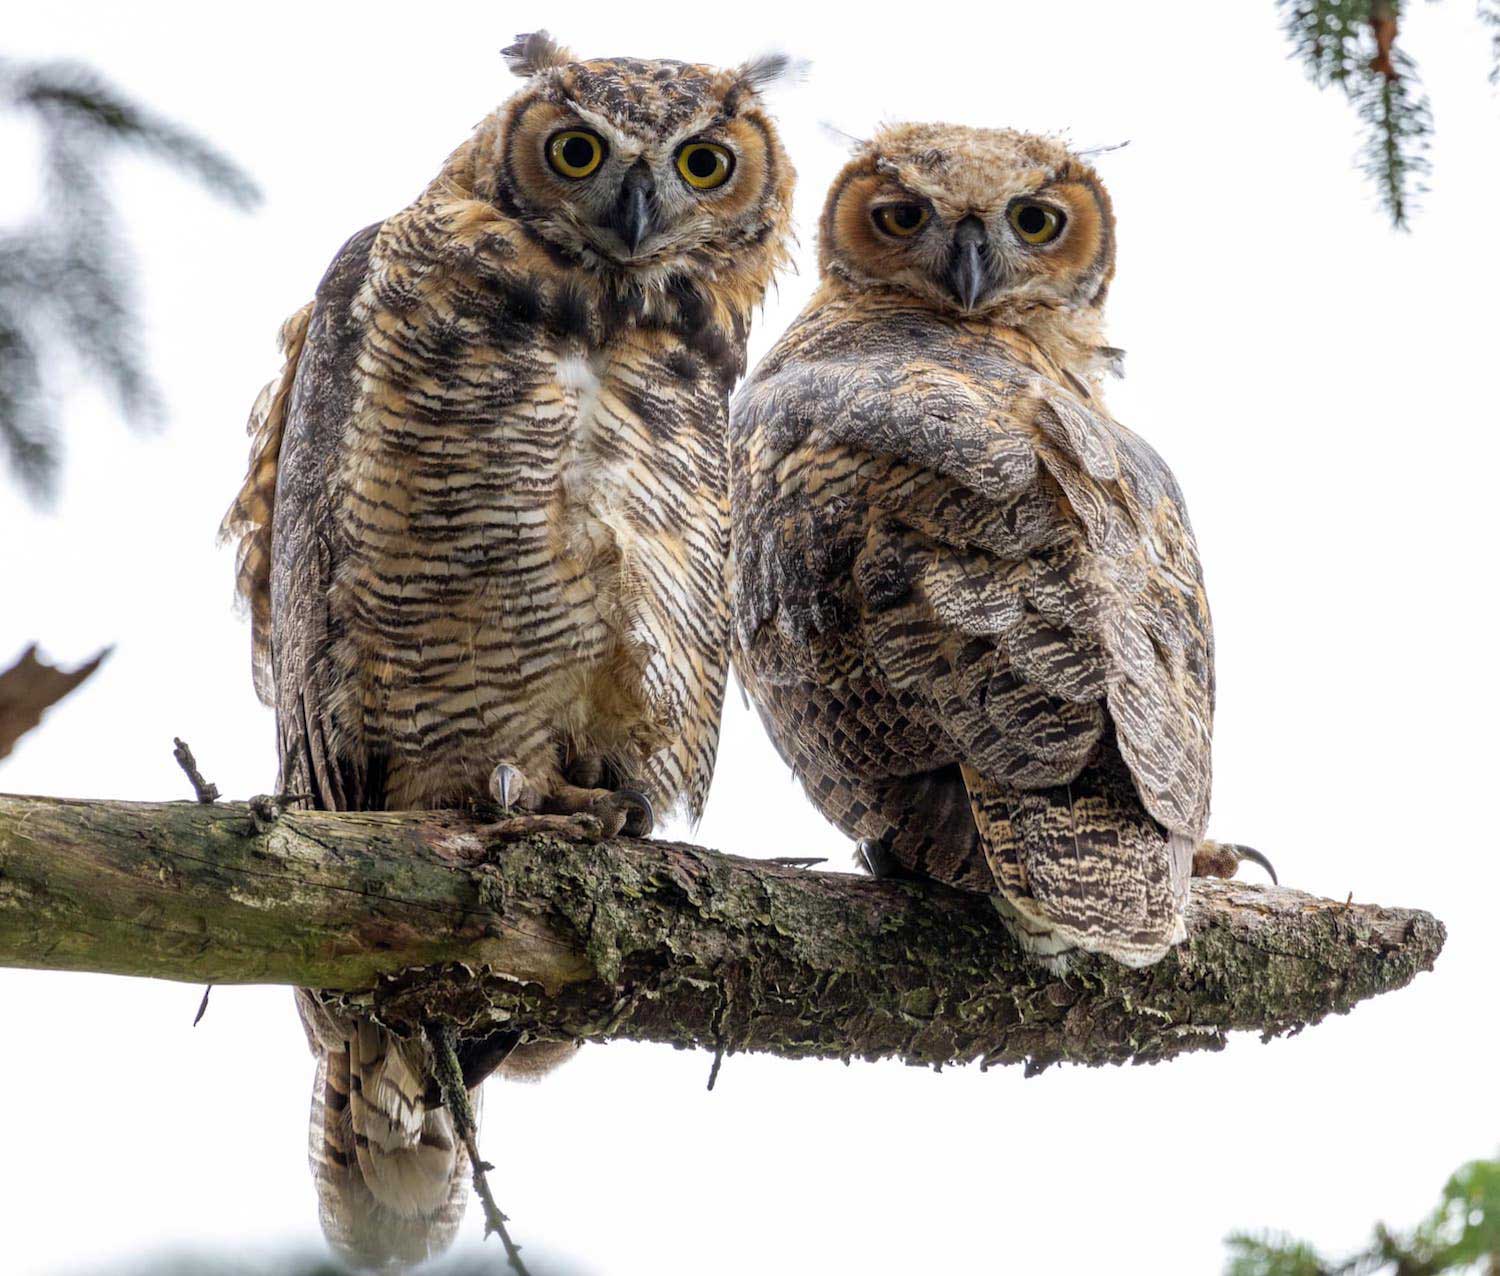 Two great horned owls perched on a branch.